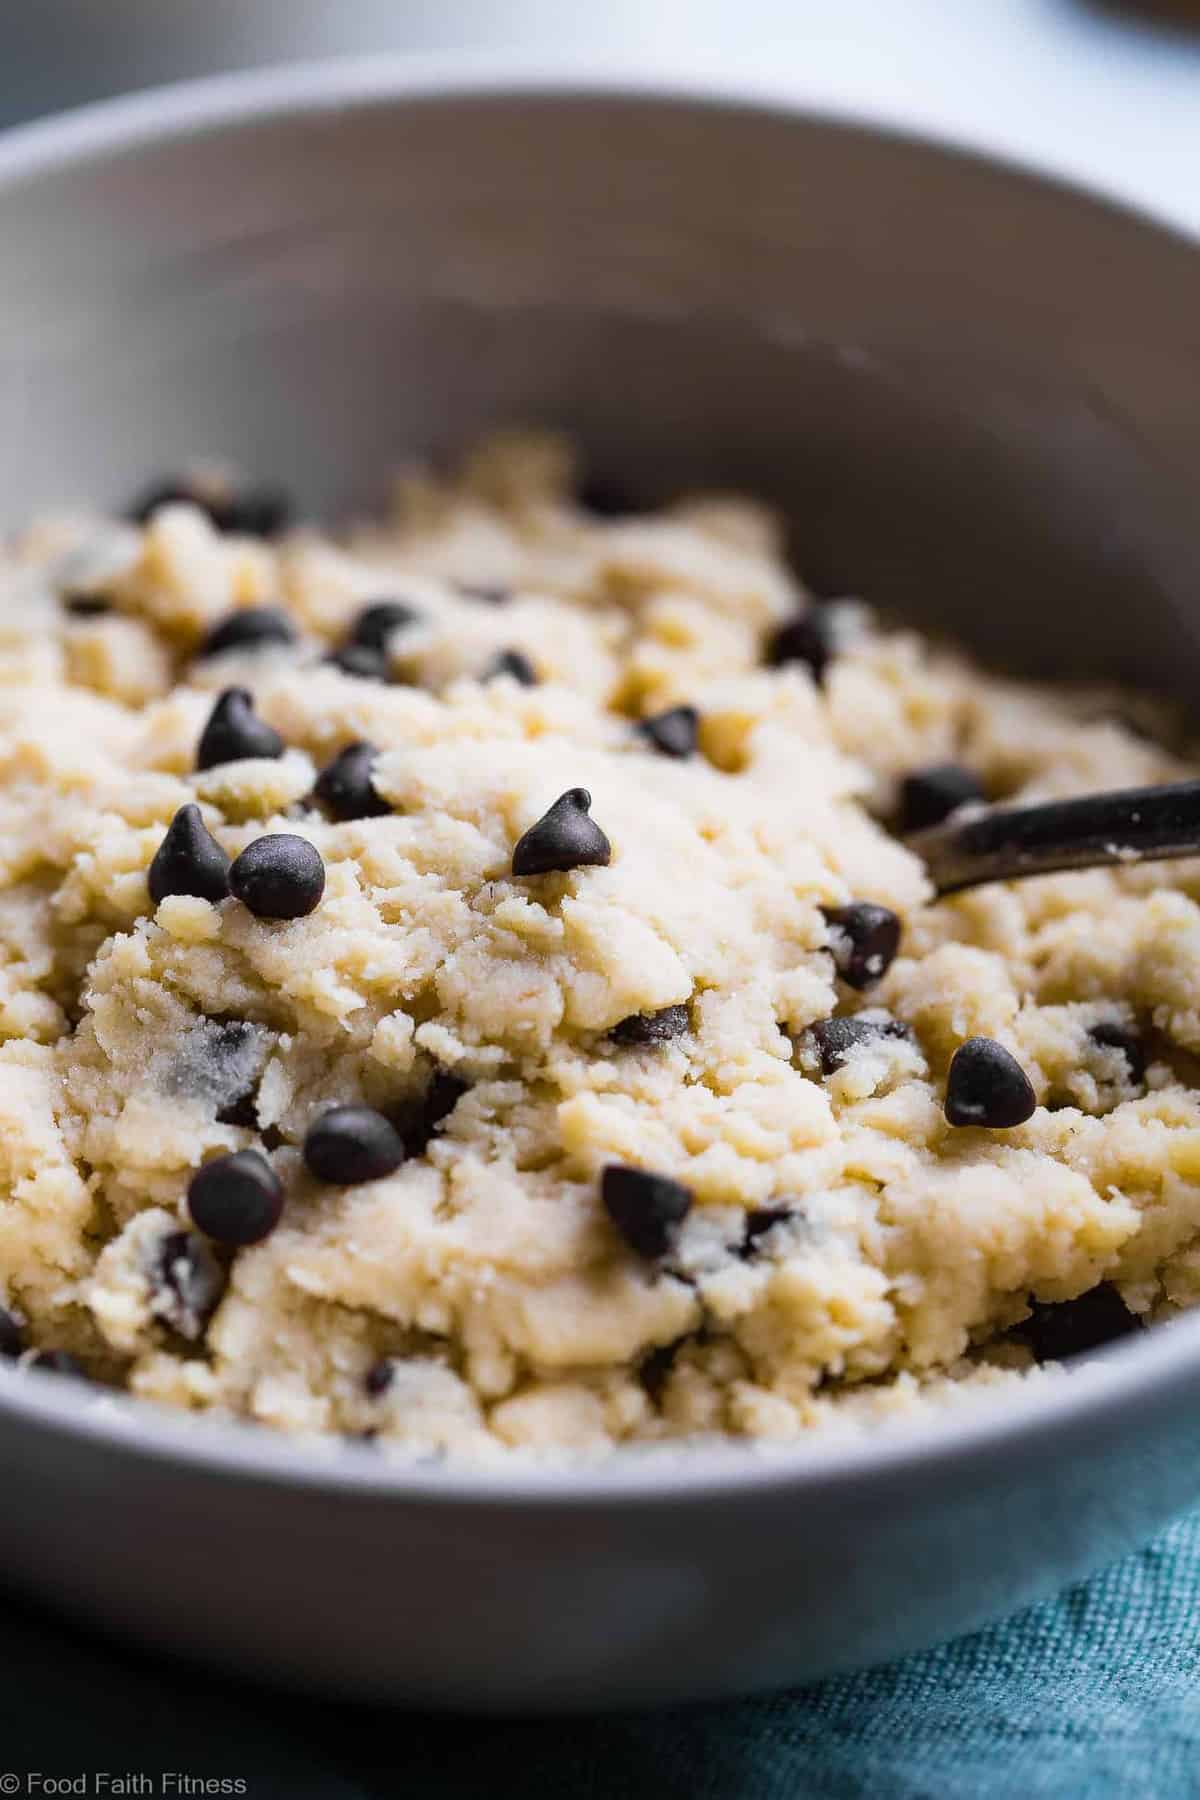 Healthy Protein Powder Cookie Dough -  This 5 ingredient healthy, edible cookie dough is gluten free, paleo/vegan friendly and ready in 5 minutes! It packs 20g of protein and only 200 calories so you can eat the whole bowl! | #Foodfaithfitness | #Glutenfree #Healthy #Paleo #Vegan #Snack